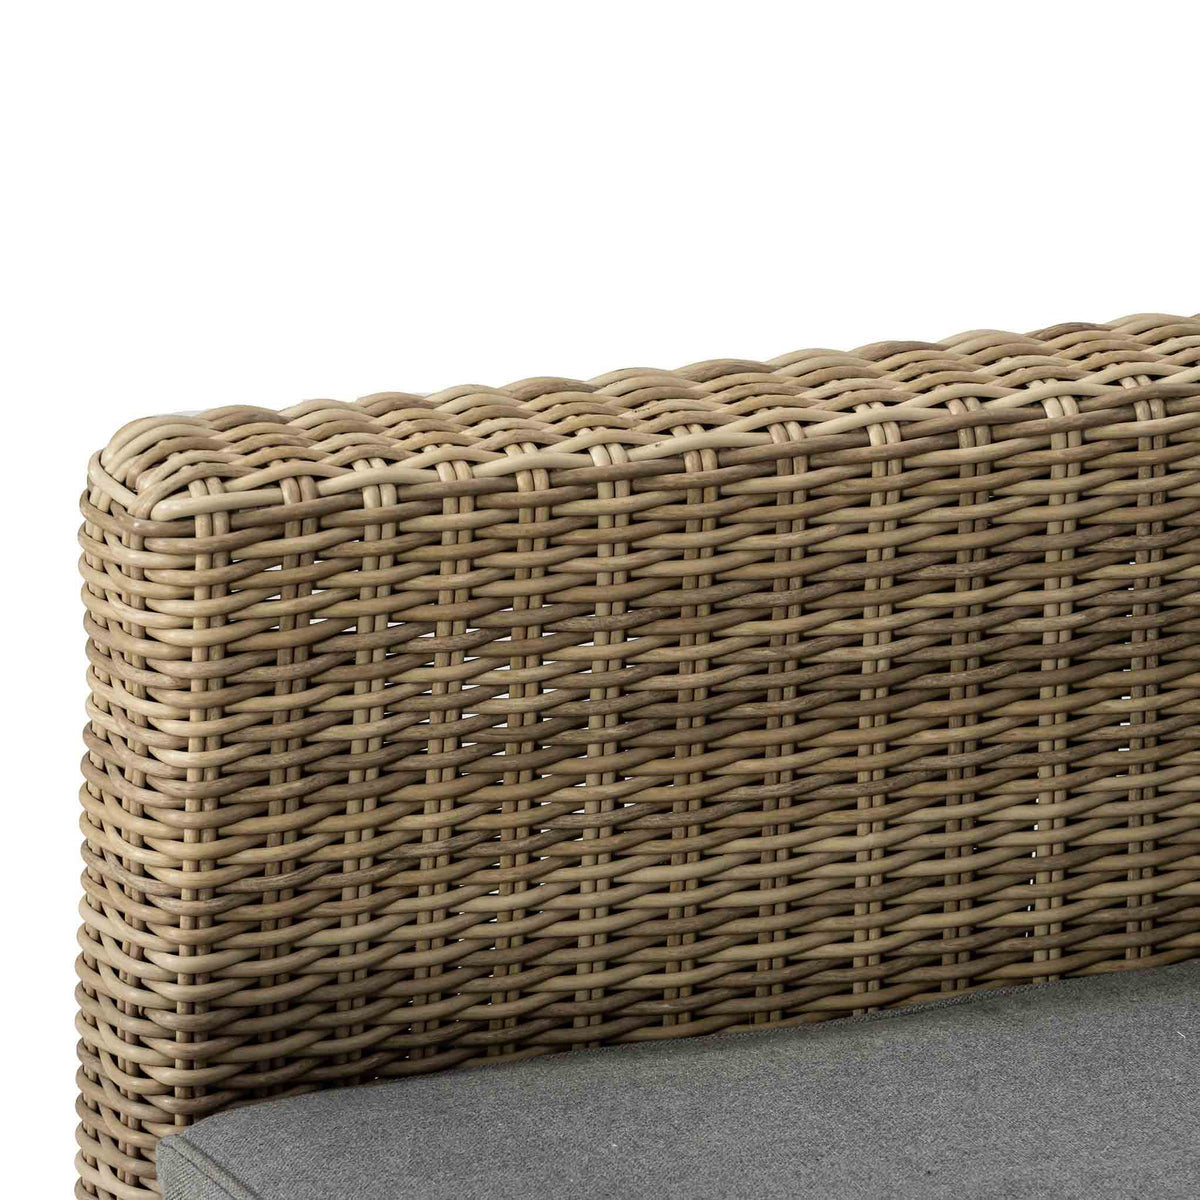 Wentworth Deluxe Rattan Sofa Garden Lounge Set with Adjustable Table - Close up of Arm of Chair